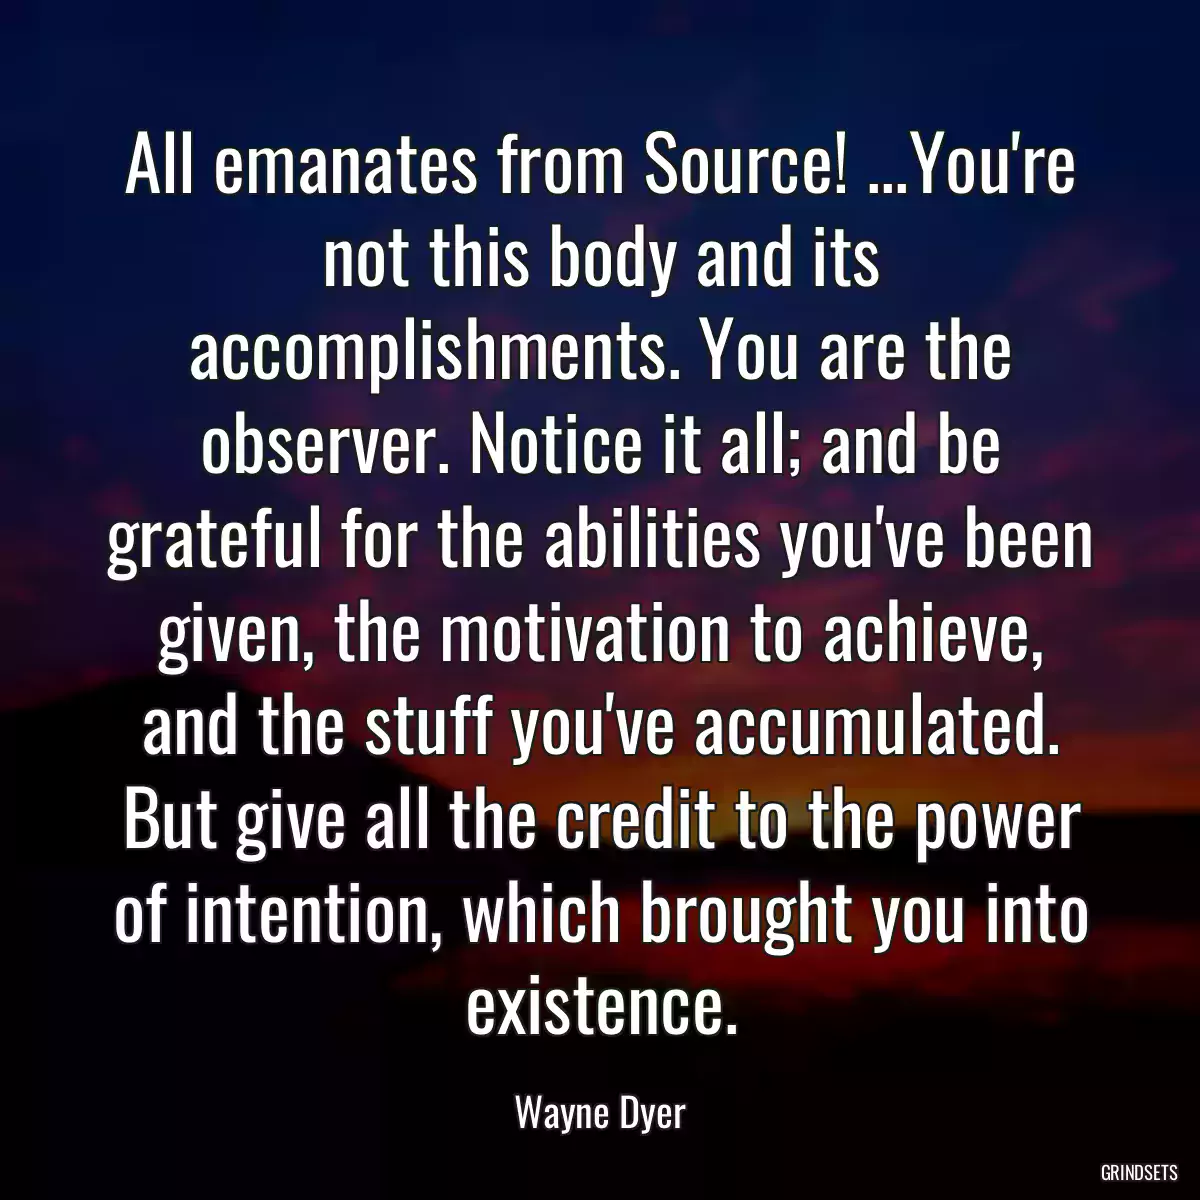 All emanates from Source! ...You\'re not this body and its accomplishments. You are the observer. Notice it all; and be grateful for the abilities you\'ve been given, the motivation to achieve, and the stuff you\'ve accumulated. But give all the credit to the power of intention, which brought you into existence.